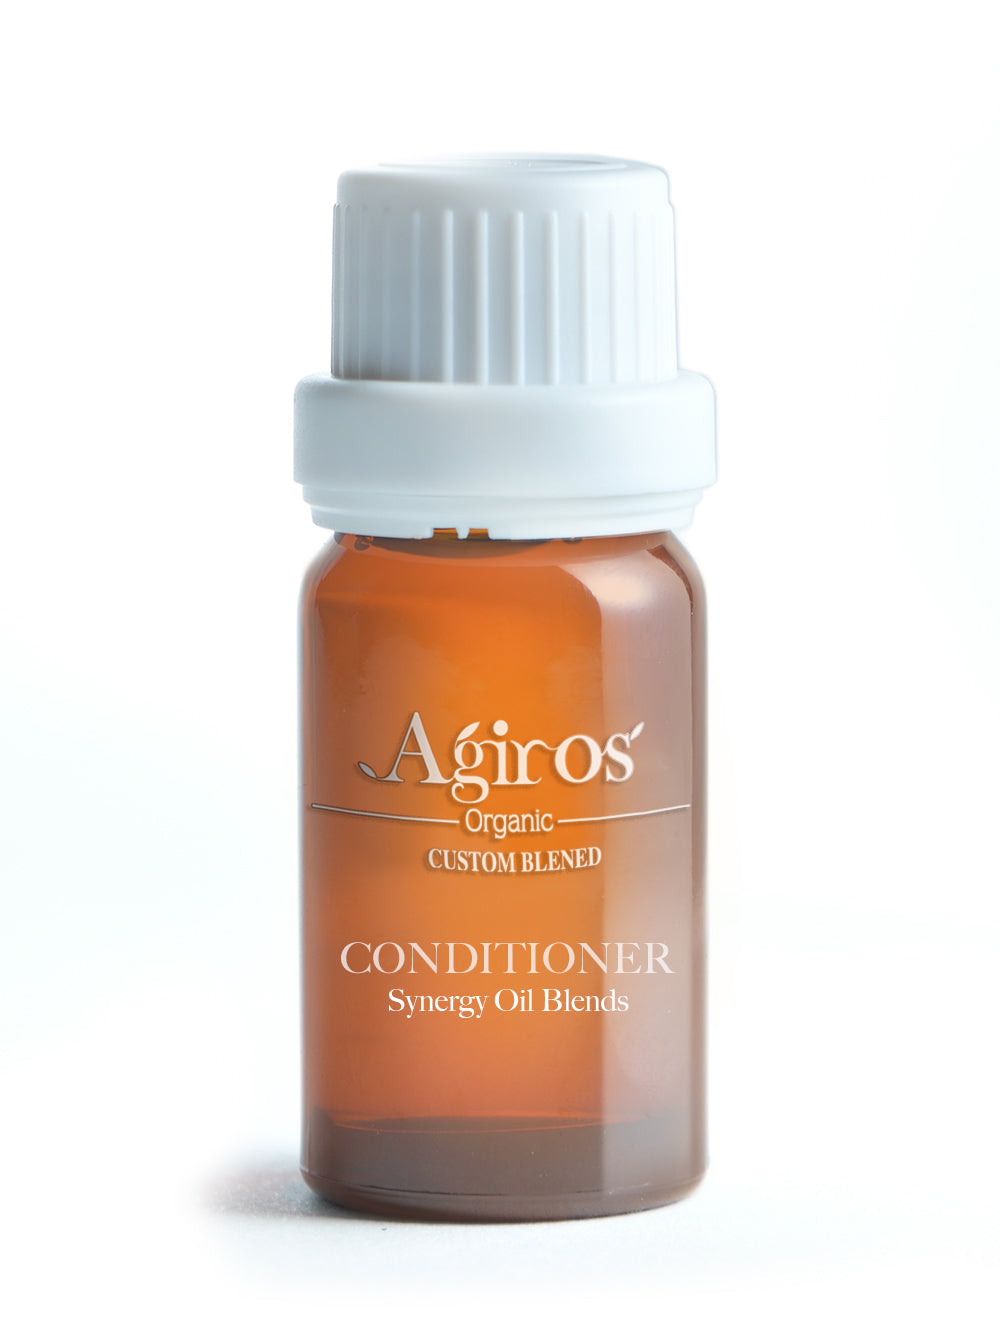 Synergy Oil Blends EO (conditioner)